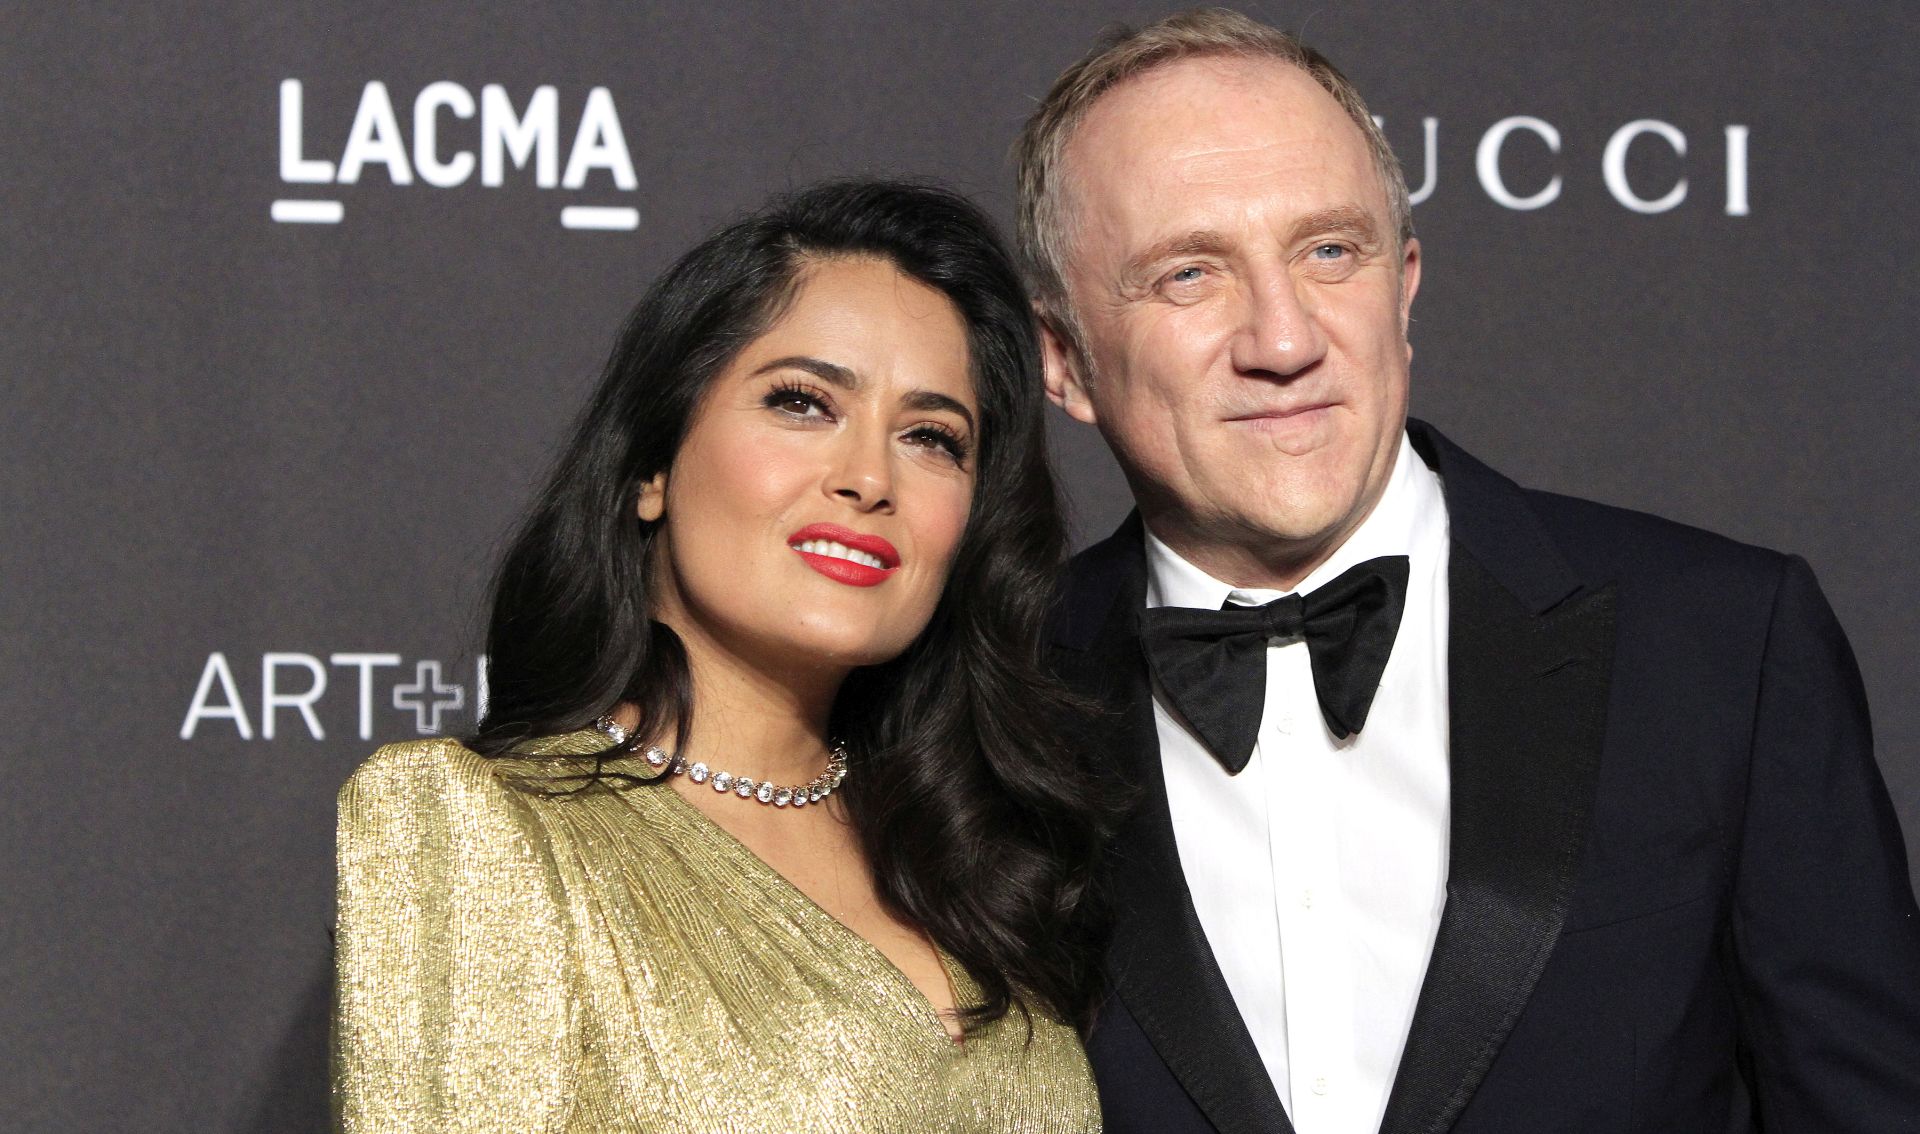 epa07509555 (FILE) Salma Hayek and her husband Francois-Henri Pinault arrive for the LACMA Art + Film Gala at the Los Angeles County Museum of Art in Los Angeles, California, USA, 03 November 2018 (reissued 16 April 2019). According to reports, French luxury group Kering CEO Francois-Henri Pinault announced on 16 April 2019 donation of 100 mln euros for reconstruction of damaged Notre Dame Cathedral. A huge fire started in the late afternoon on 15 April in the historic monument of the French capital burning the roof and a spire.  EPA/NINA PROMMER